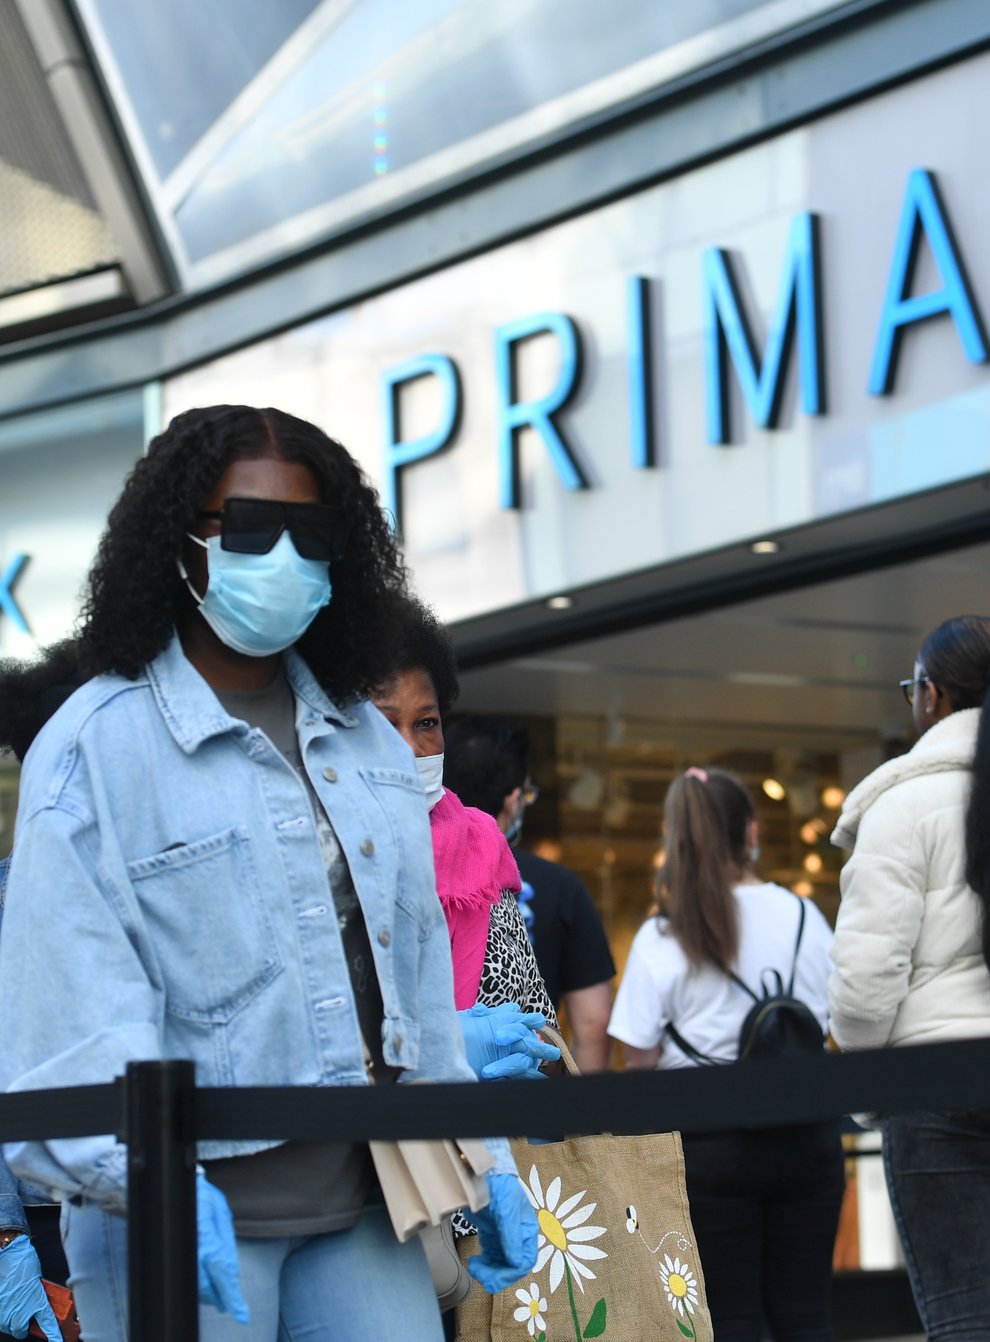 Customers outside a Primark store